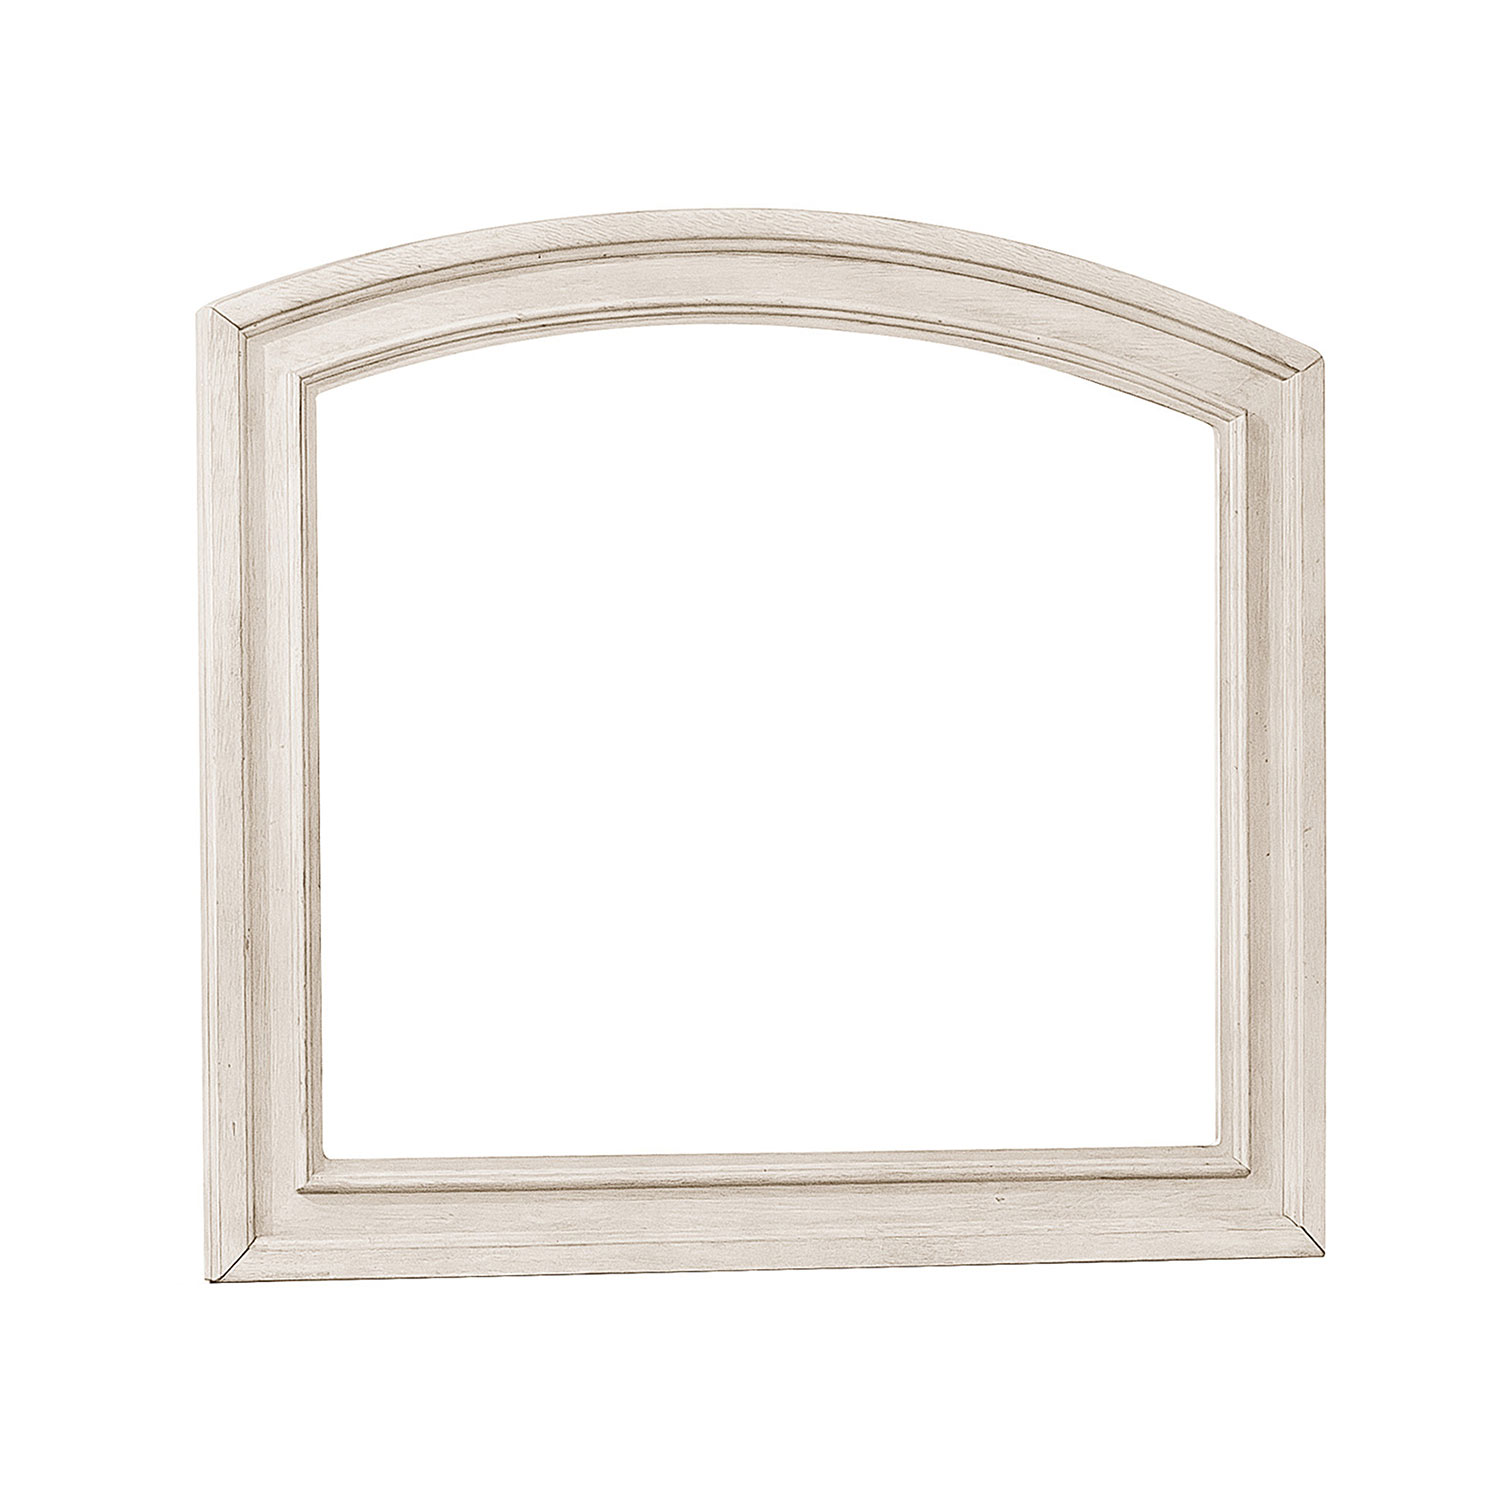 Homelegance Bethel Mirror - Wire-brushed White